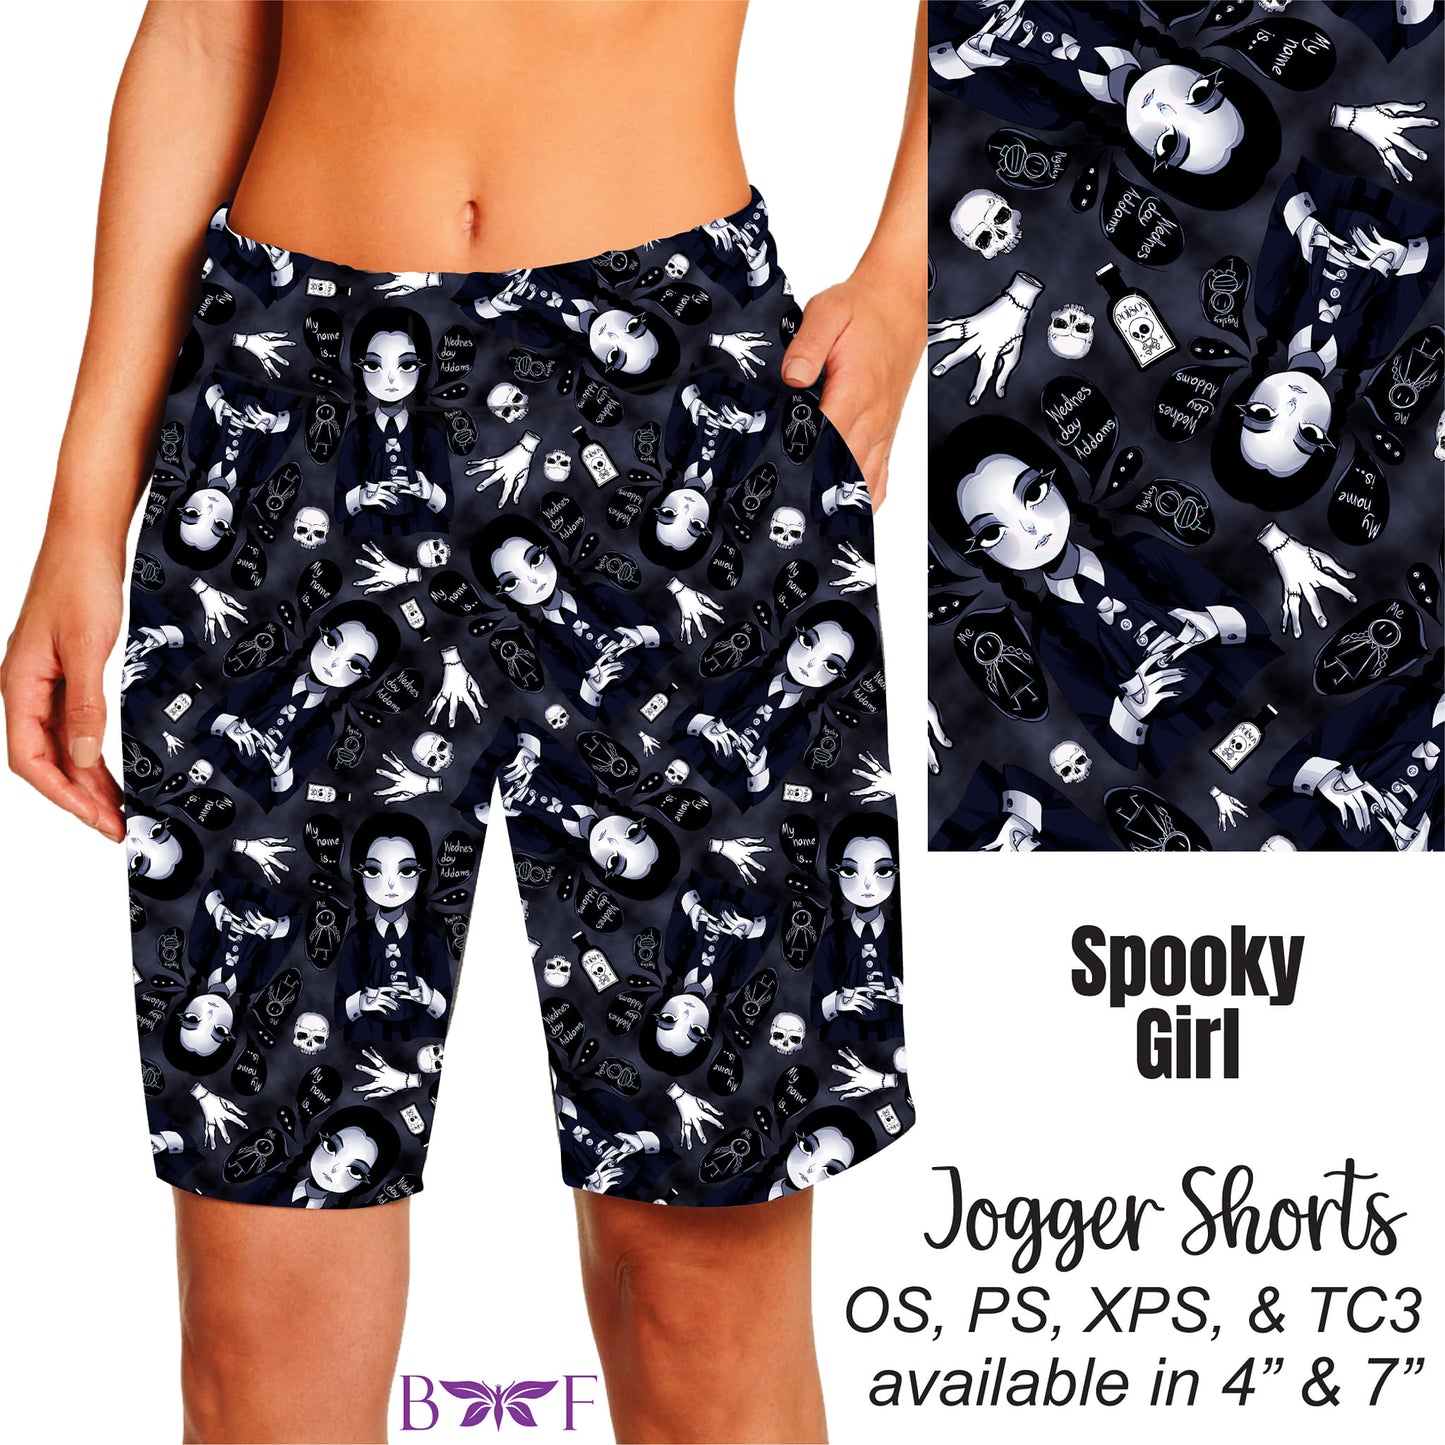 Spooky Girl Leggings with pockets